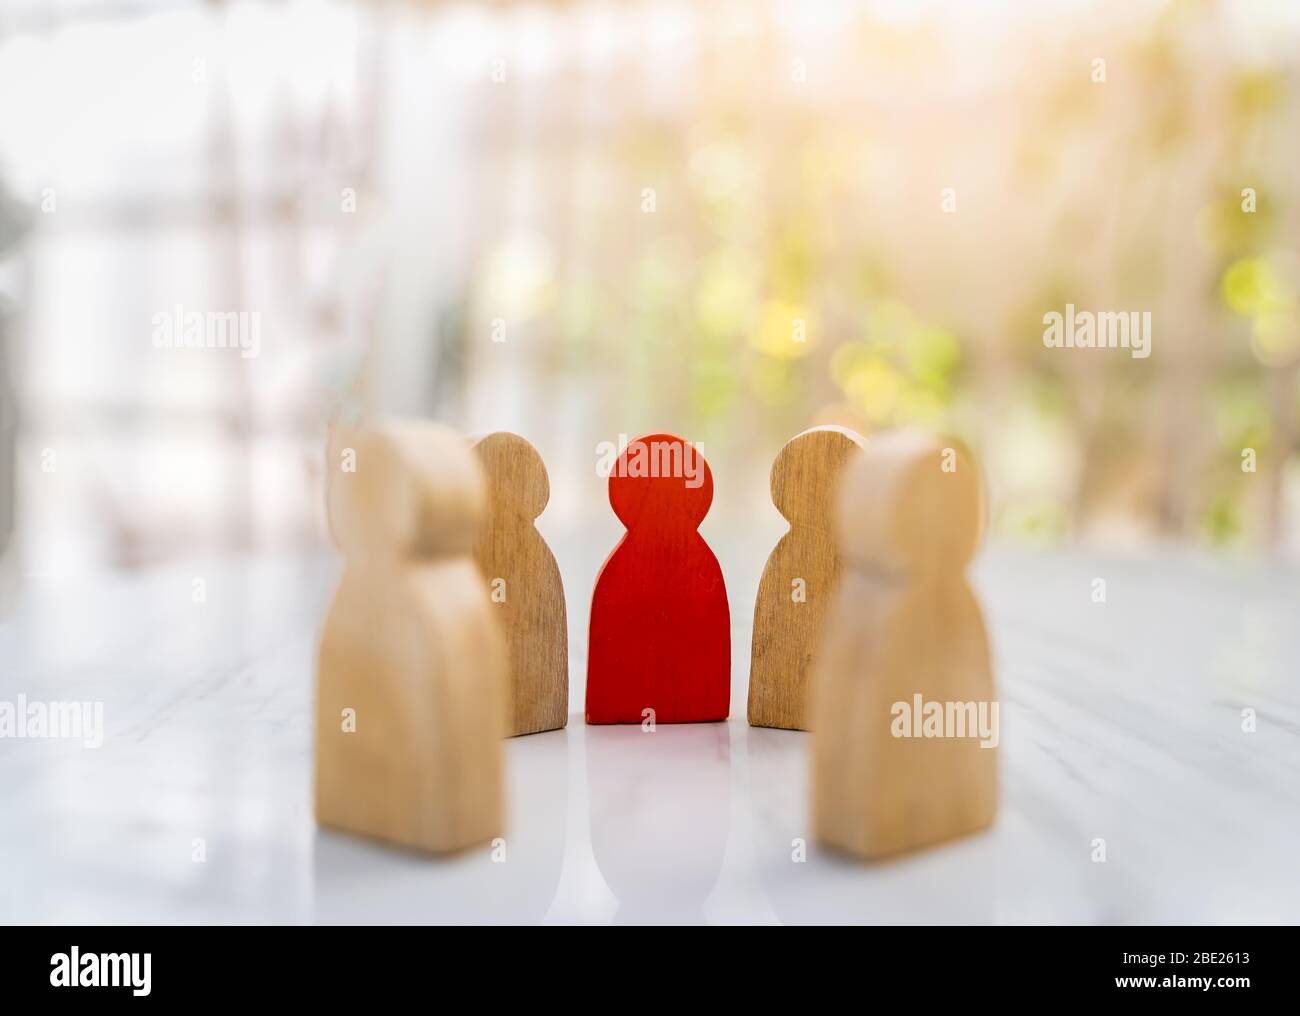 Figure in human resource management concept. The group of wooden puppets is a circular. A red wooden figure like an dominant in a group with blur boke Stock Photo